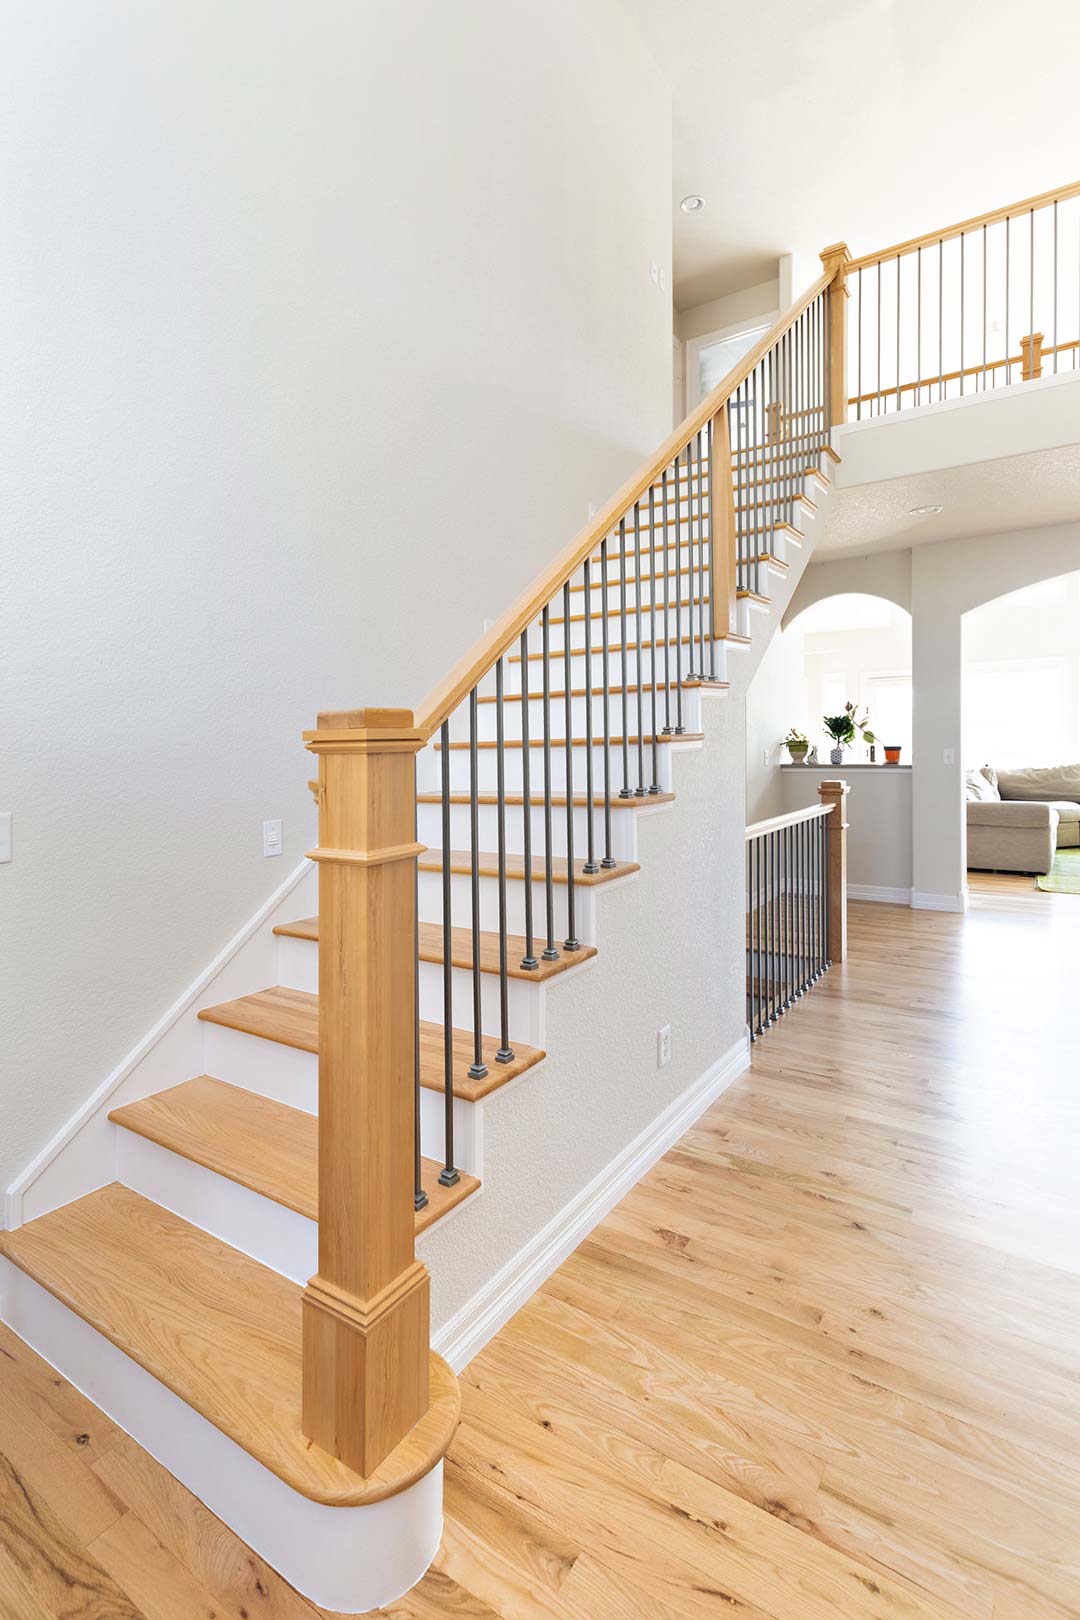 A modern custom handrail and staircase that was updated by Freestone Design-Build as a part of their home renovation project of Bridget Lane in Fort Collins Colorado